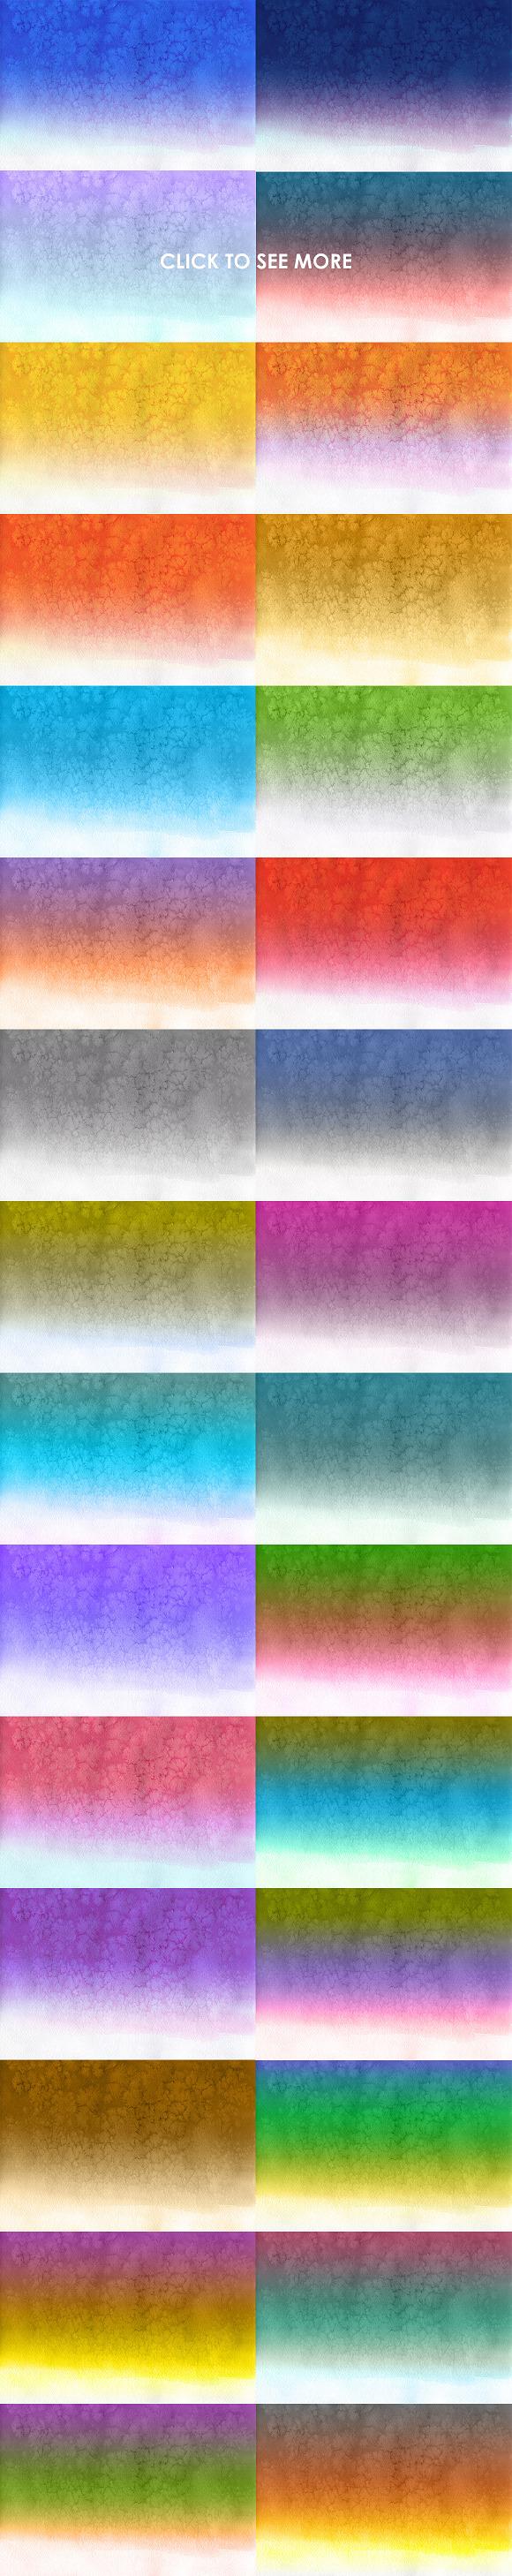 30 Watercolor Gradient Backgrounds in Textures - product preview 1